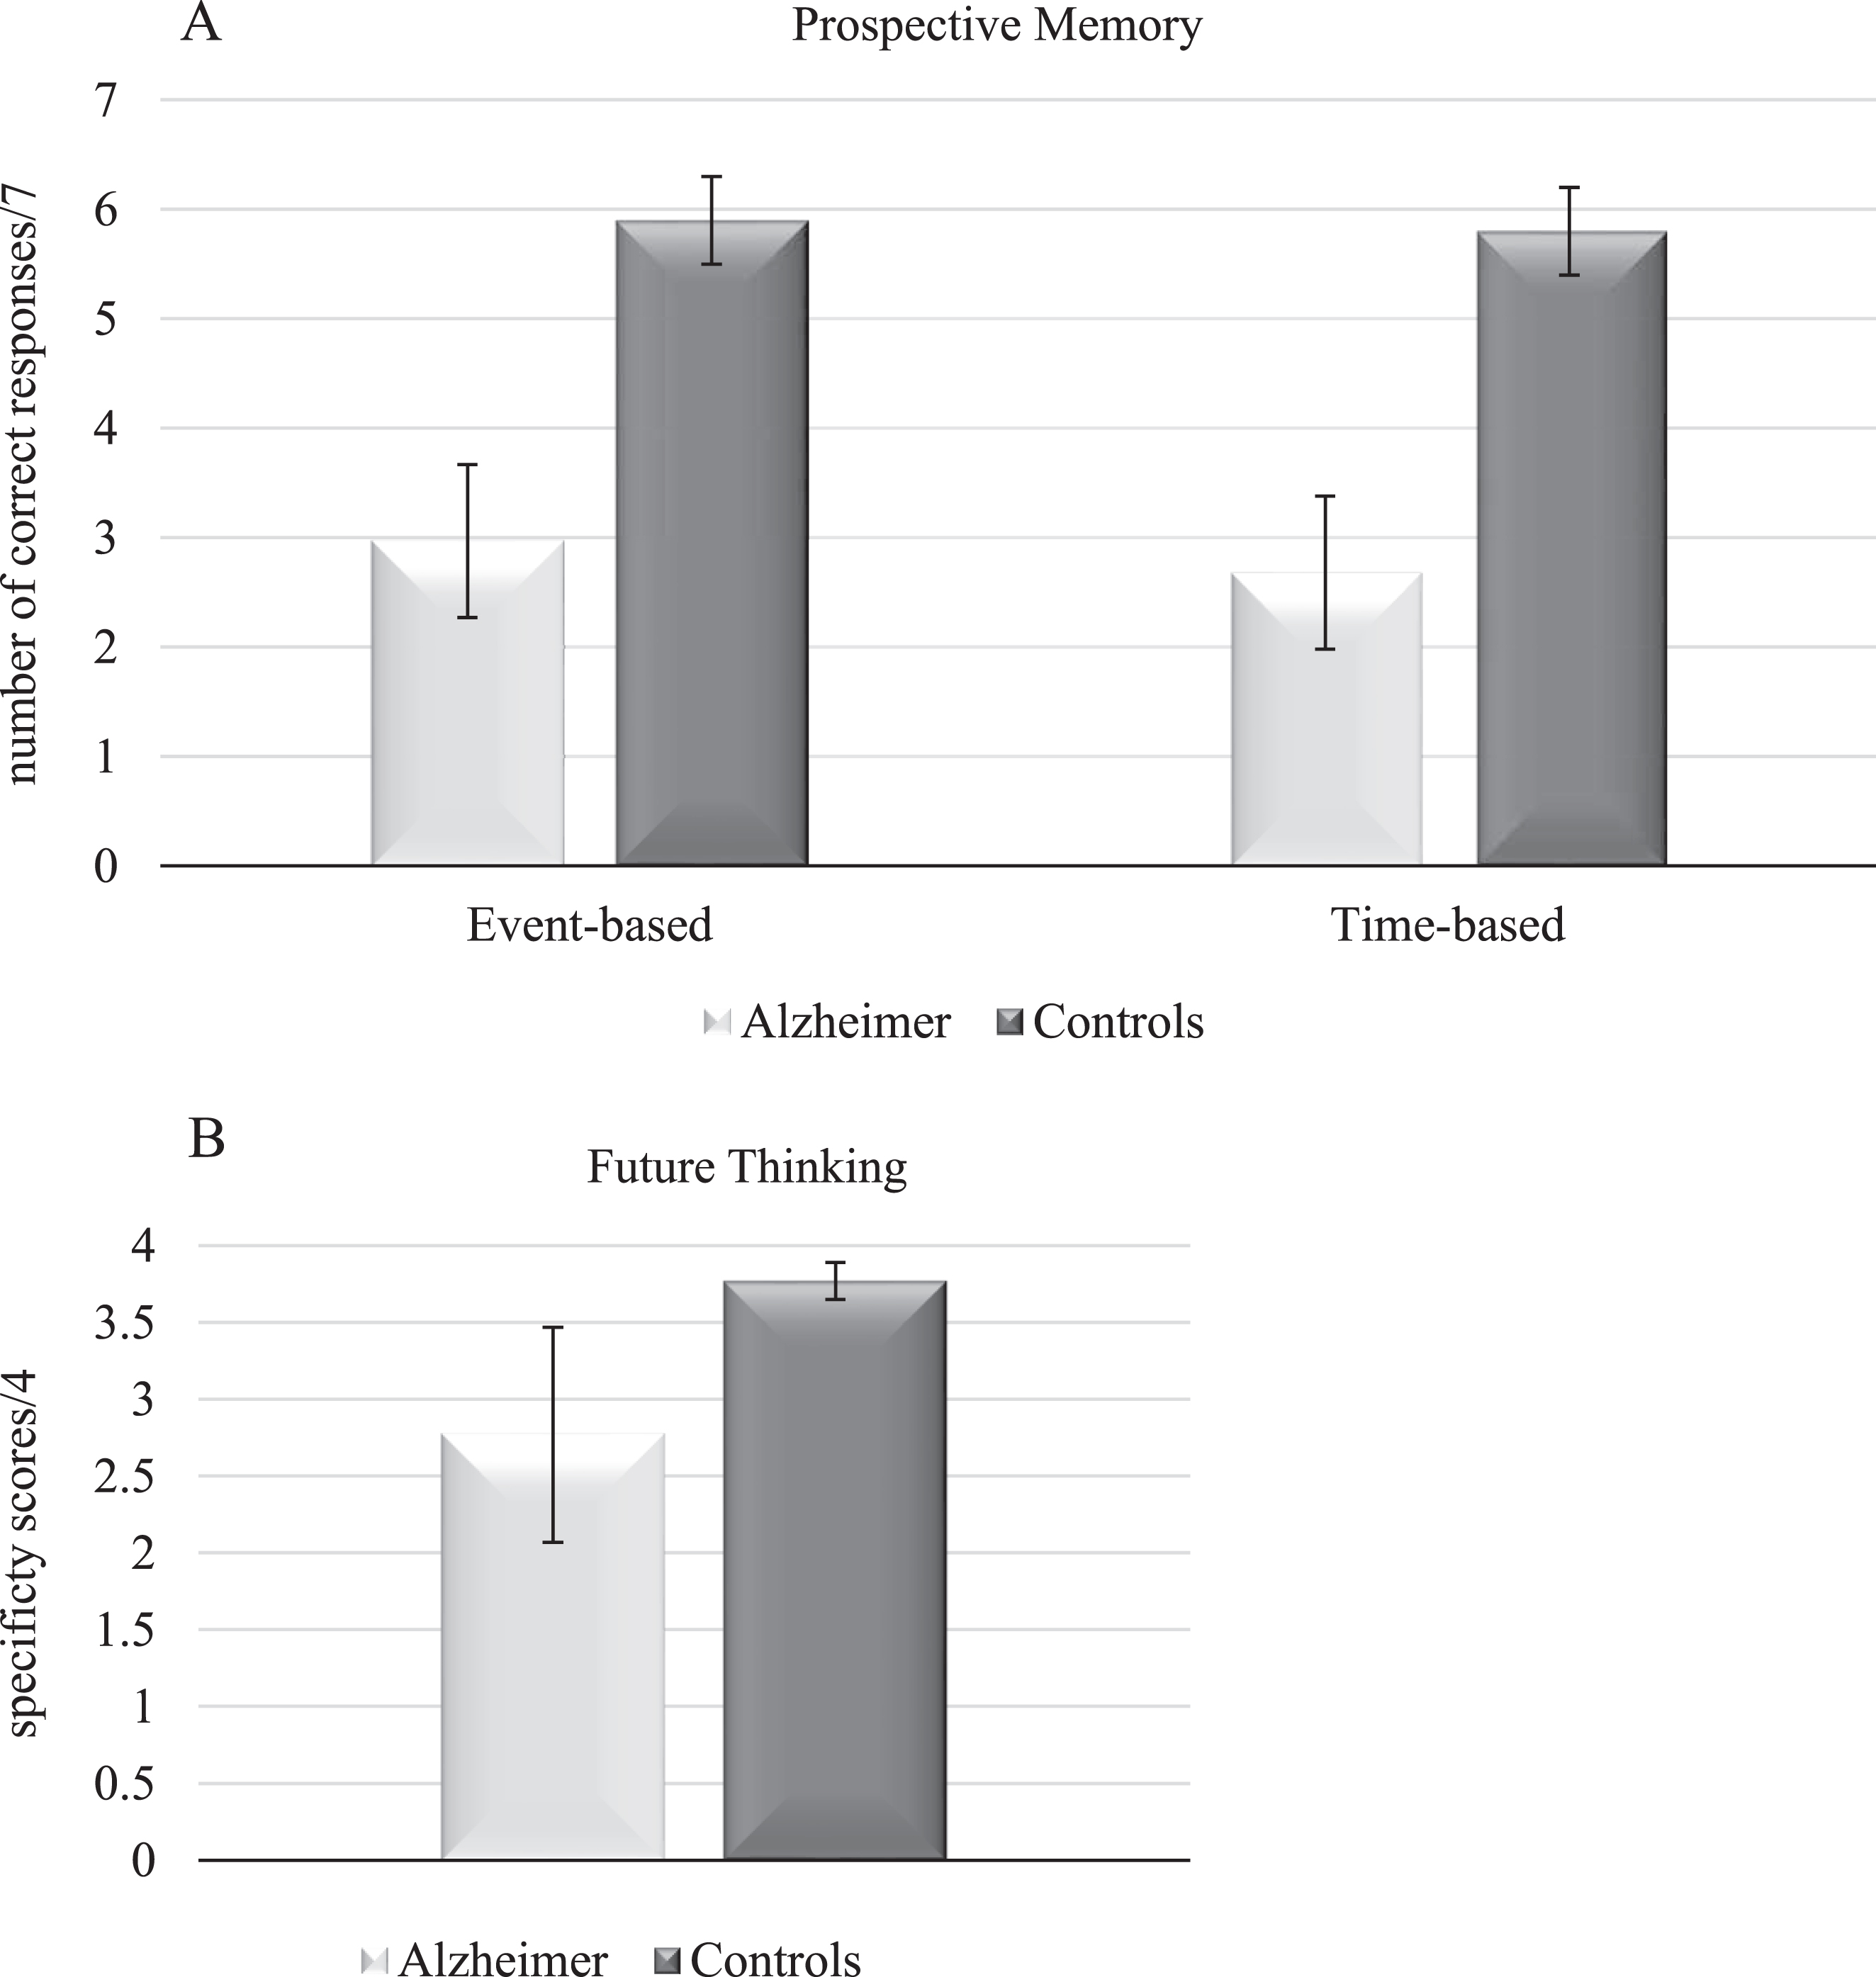 Performances on event-based and time-based prospective memory (A) and future thinking (B) in Alzheimer’s disease participants and control participants. Error bars are 95% within-subject confidence intervals.